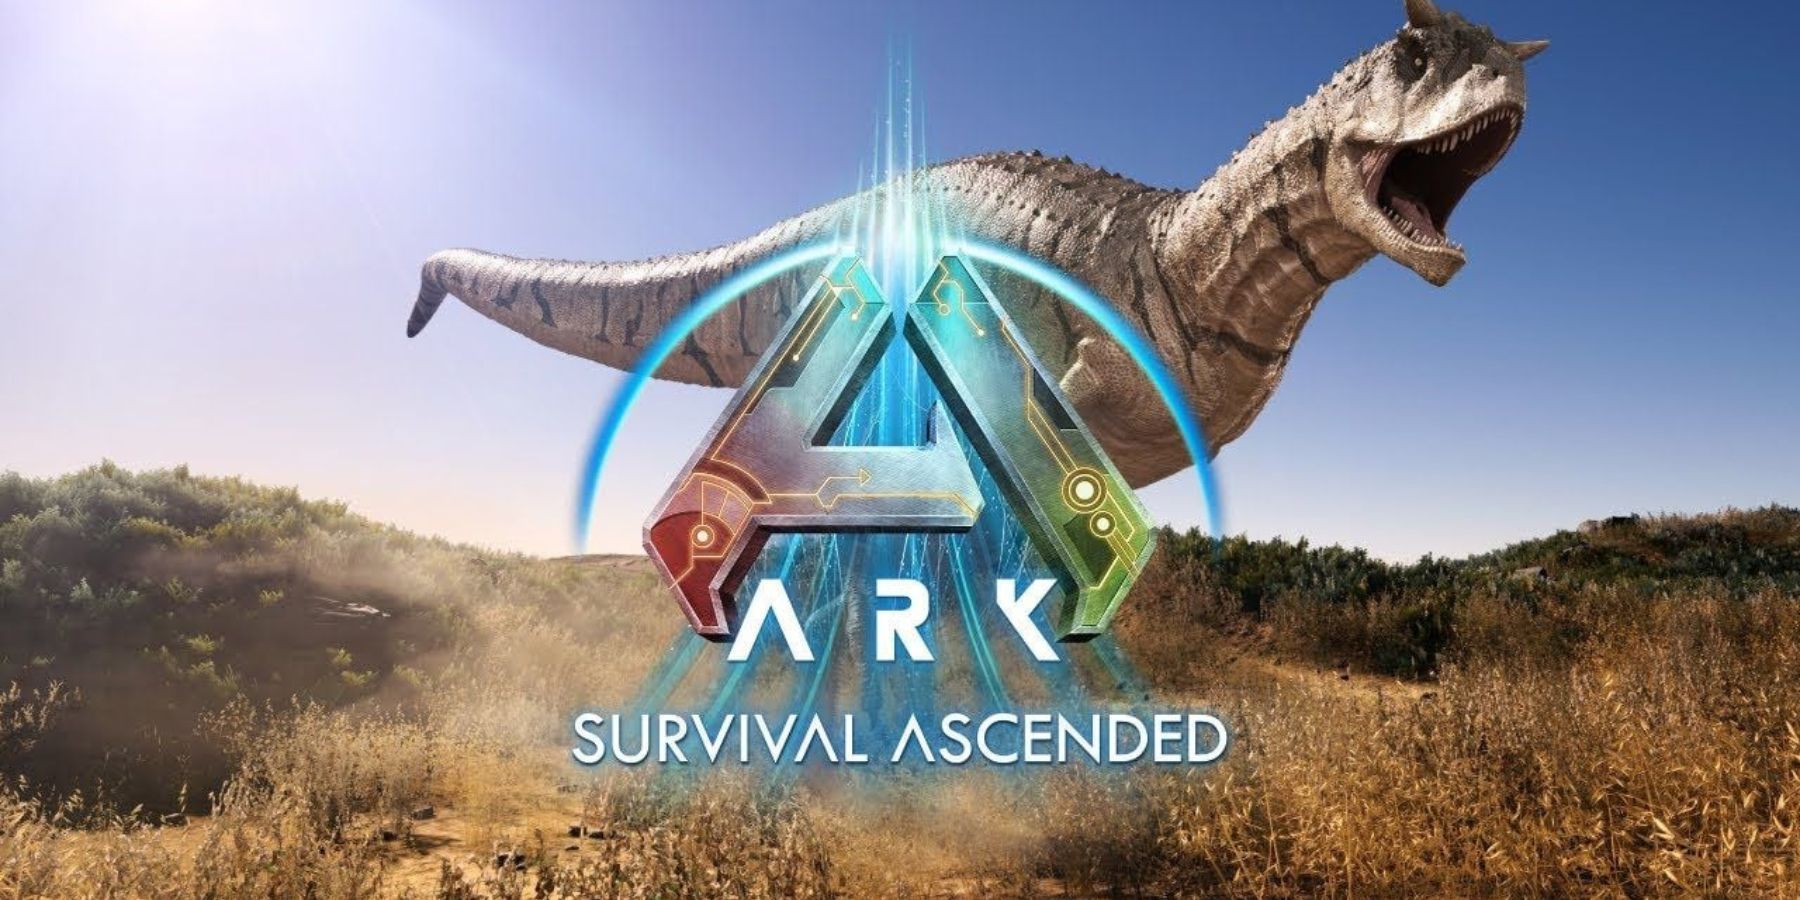 ARK Survival Ascended Surprise Launched for PC